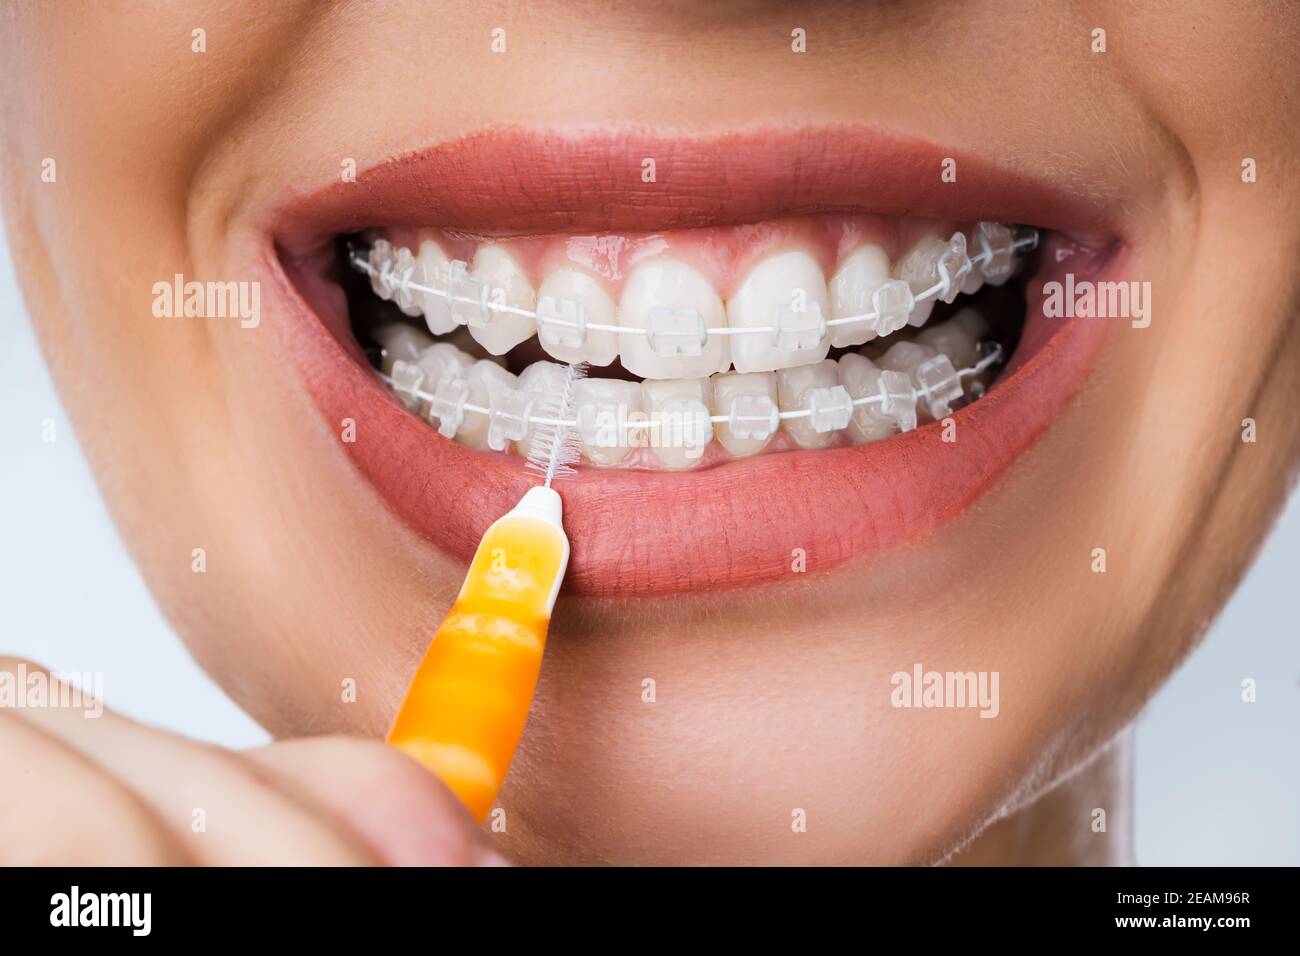 Female Cleaning Dental Brackets In Mouth Stock Photo